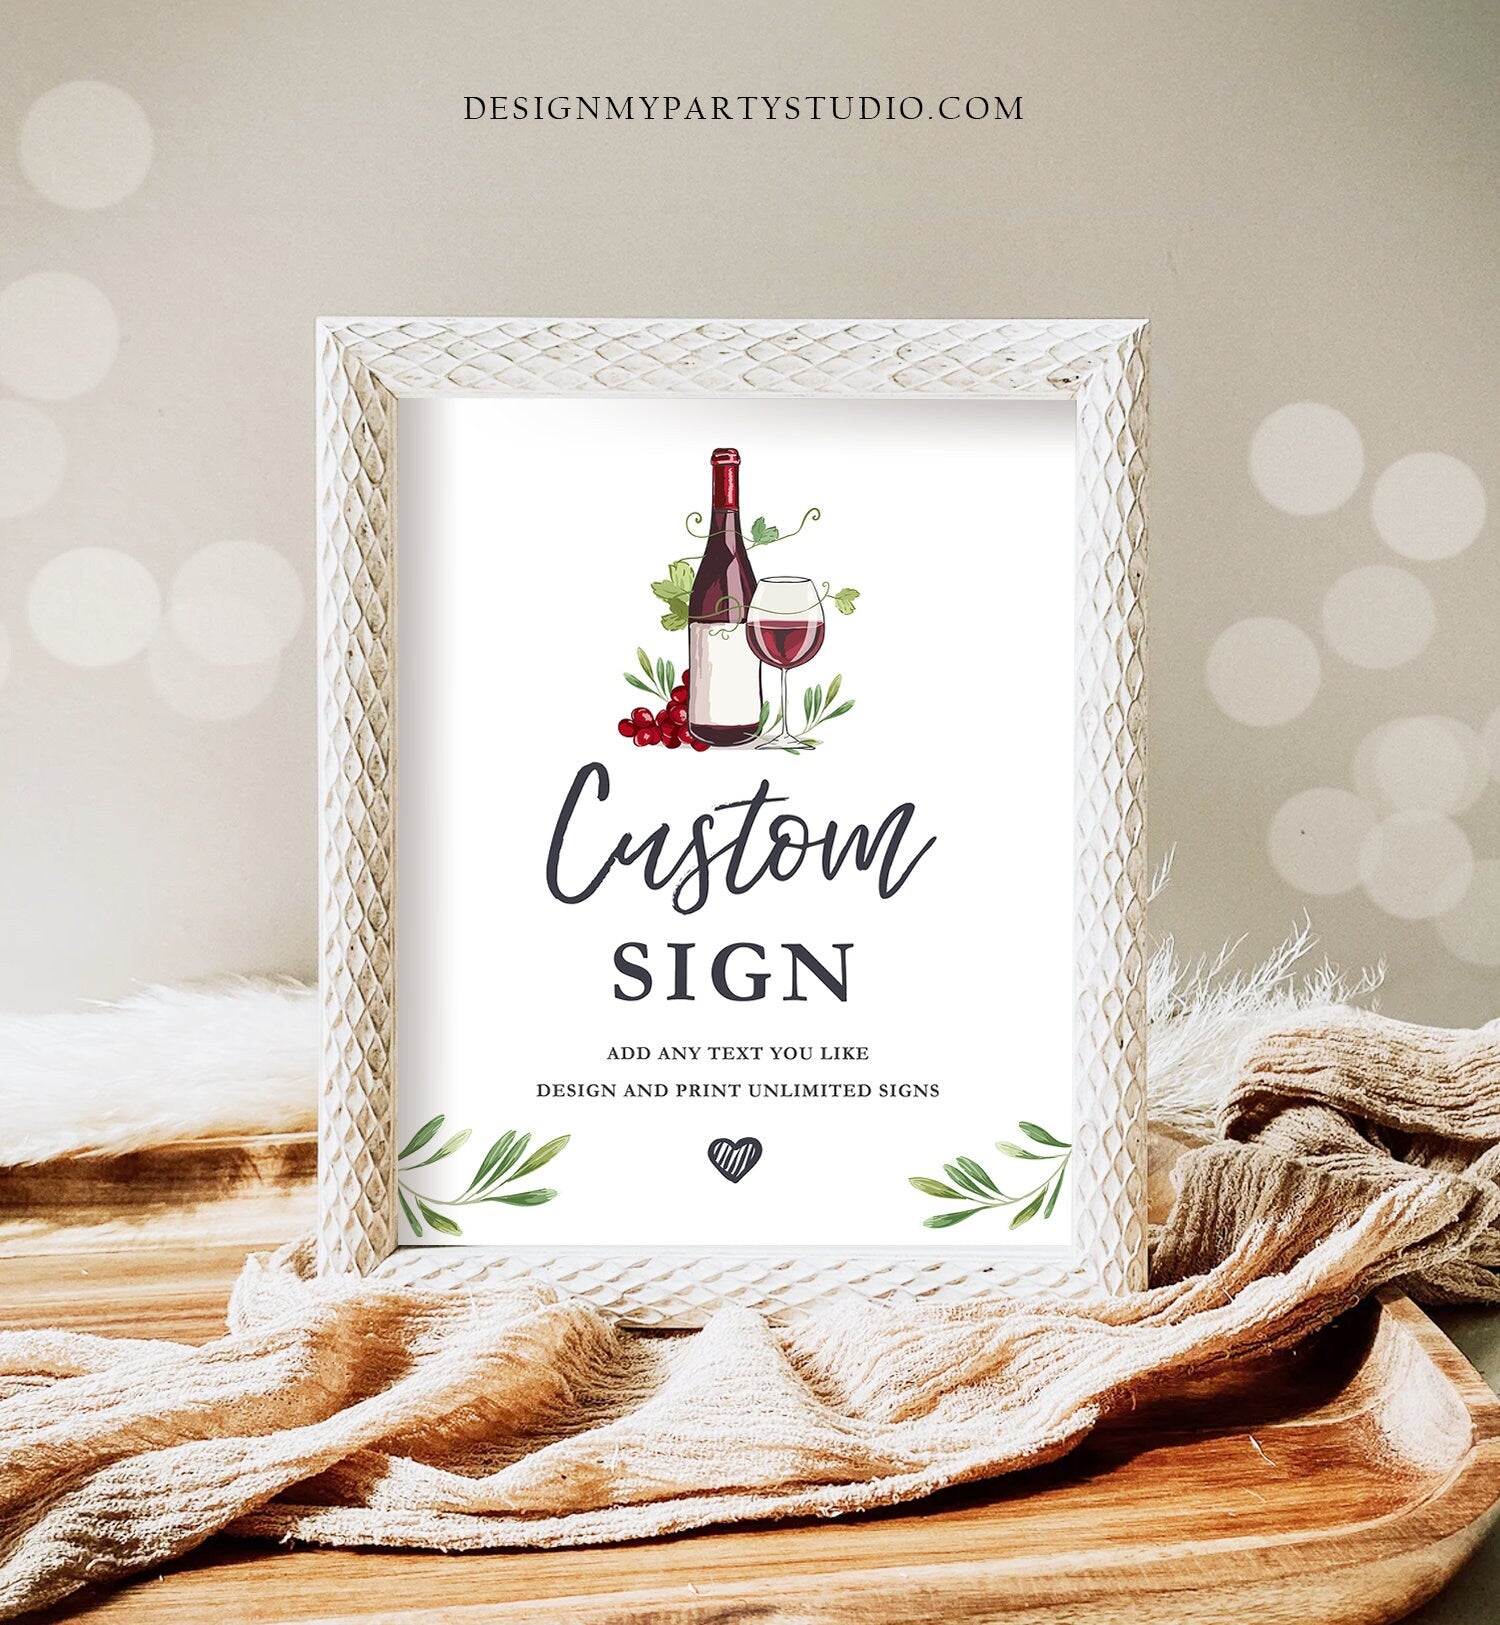 Editable Wine Custom Sign Bridal Shower Wedding Couples Birthday Party Decor Grapes Rehearsal Diner Winery Table Template PRINTABLE 0234